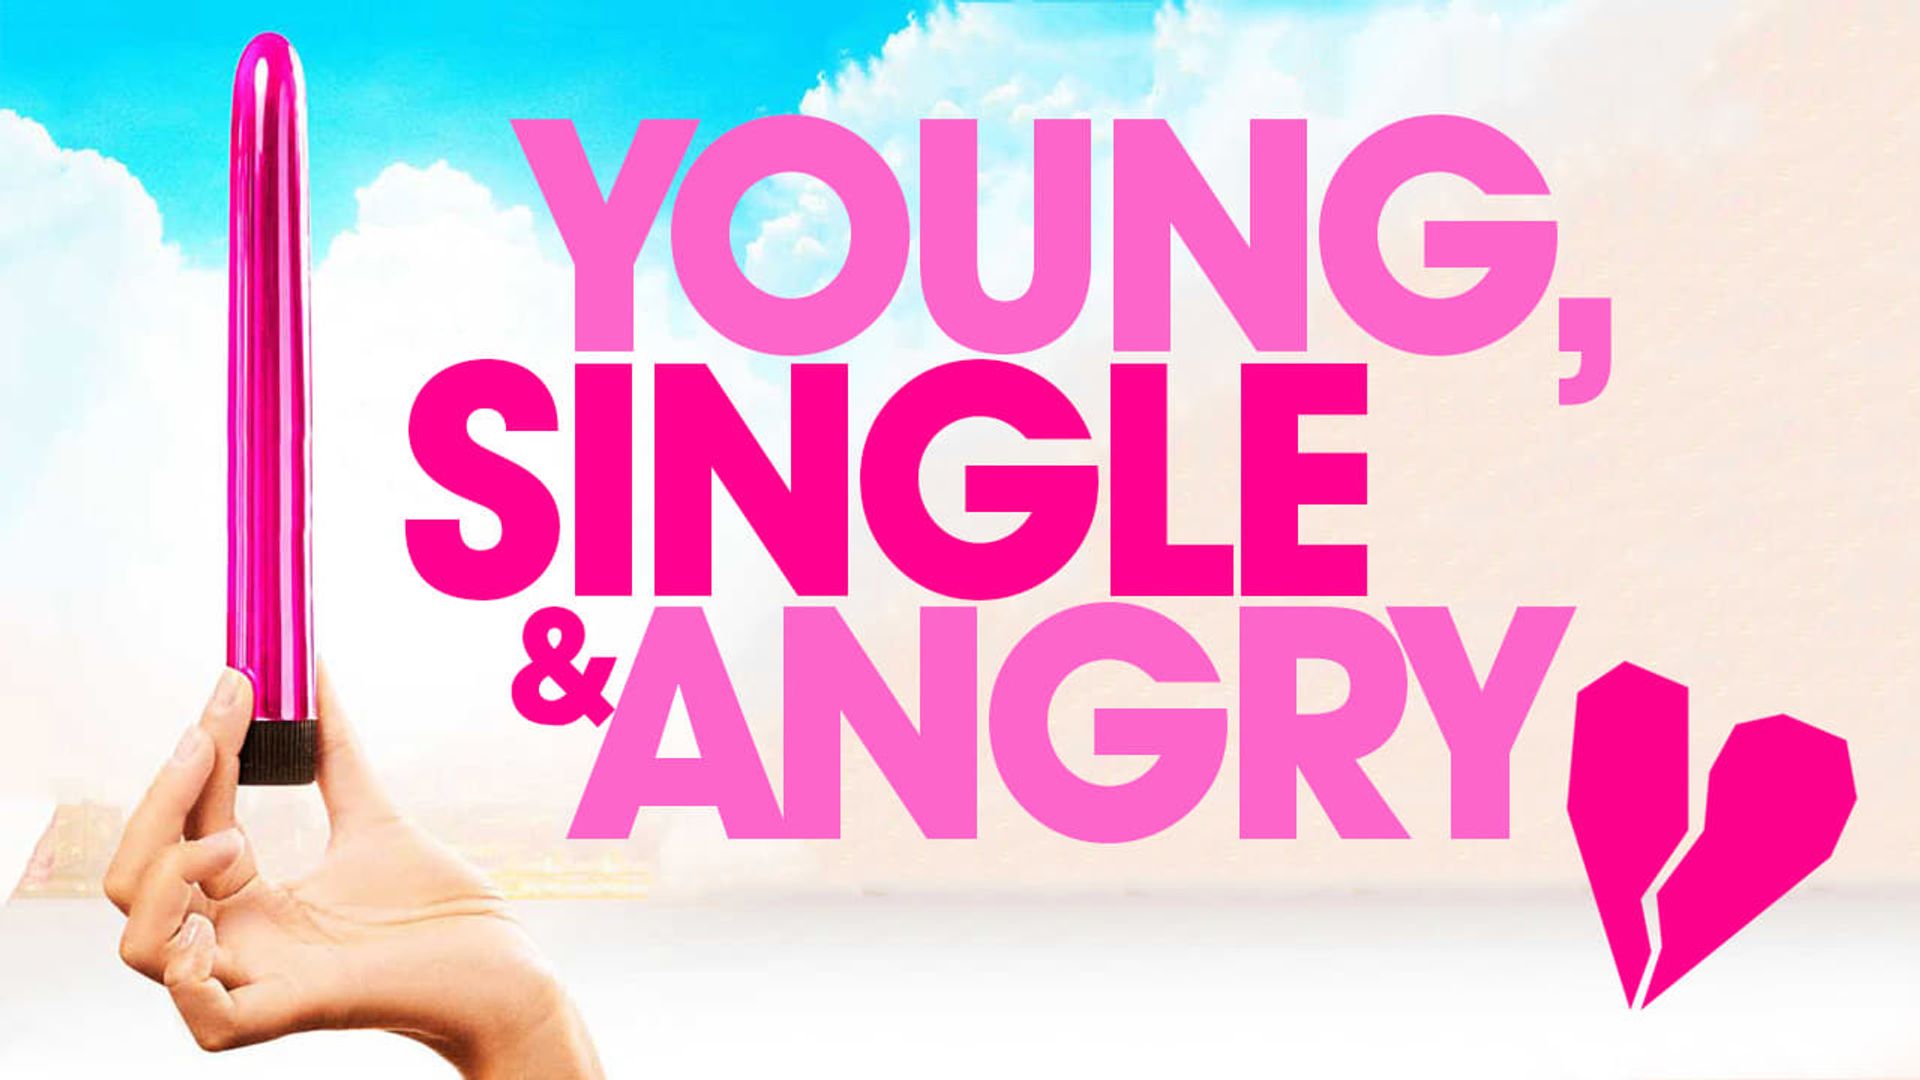 Young, Single & Angry background